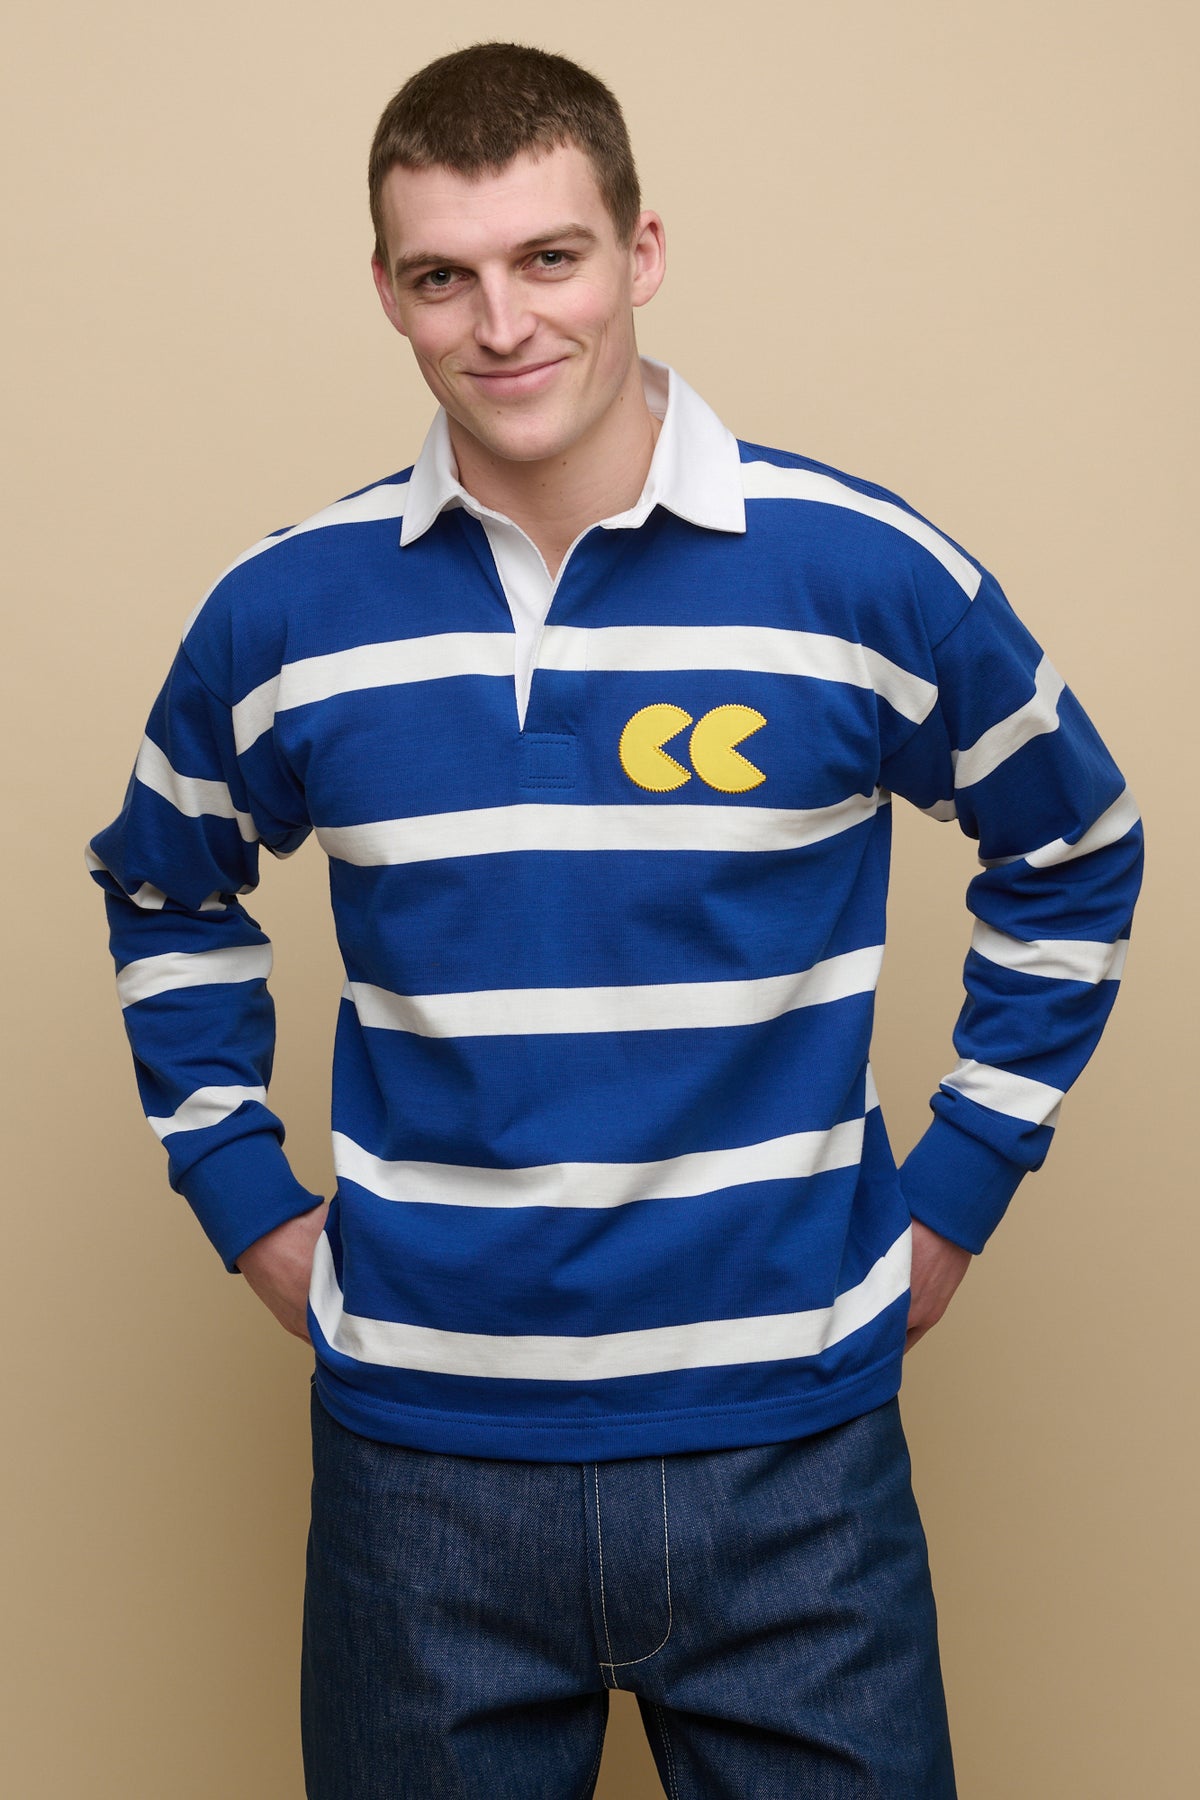 
            Smiley, brunet male with shaved brown hair wearing stripe logo rugby shirt in blue white stripe with yellow CC logo applique patch on chest